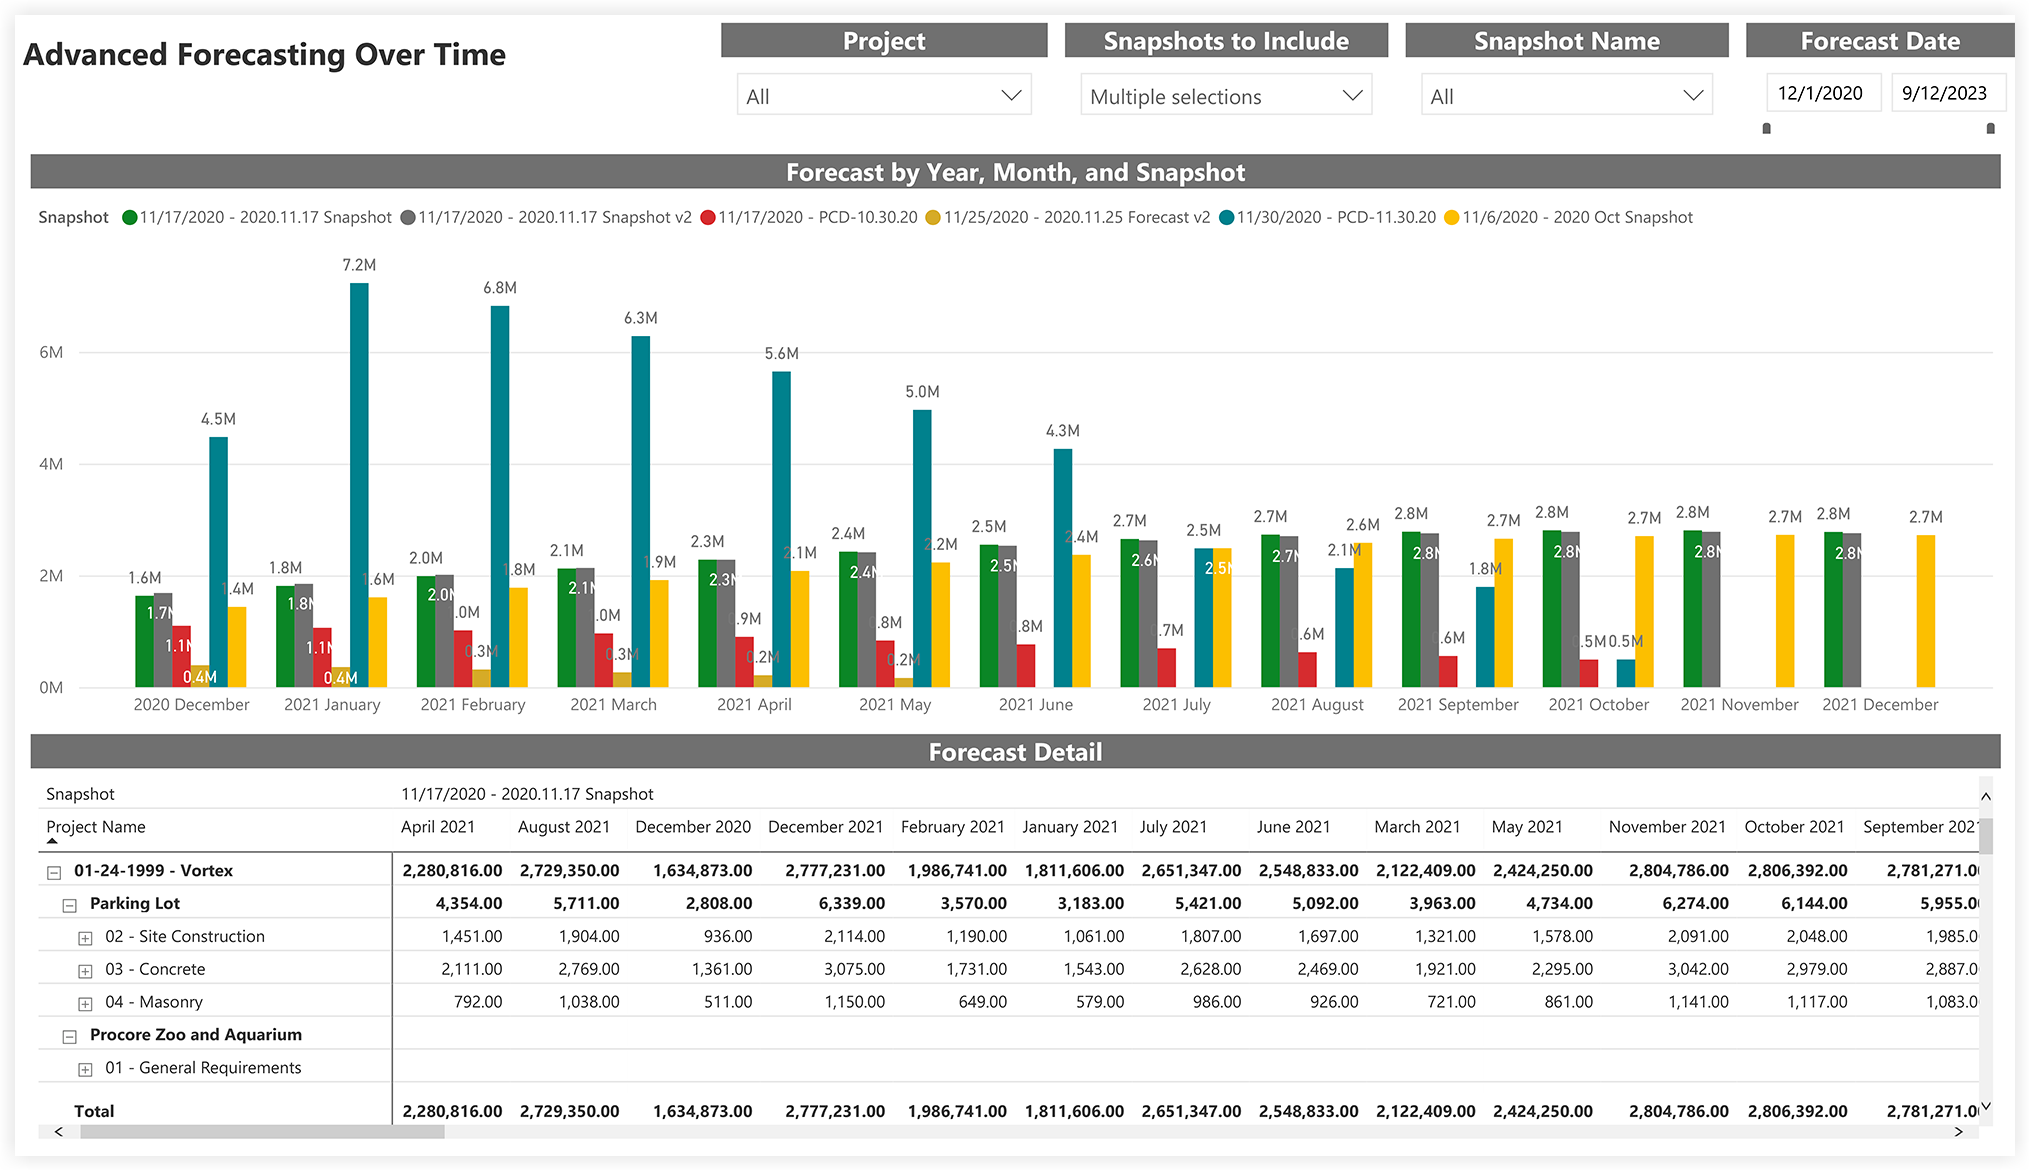 procore-analytics-q4-2020-ann-financials-budget-advanced-forecasting-over-time.png